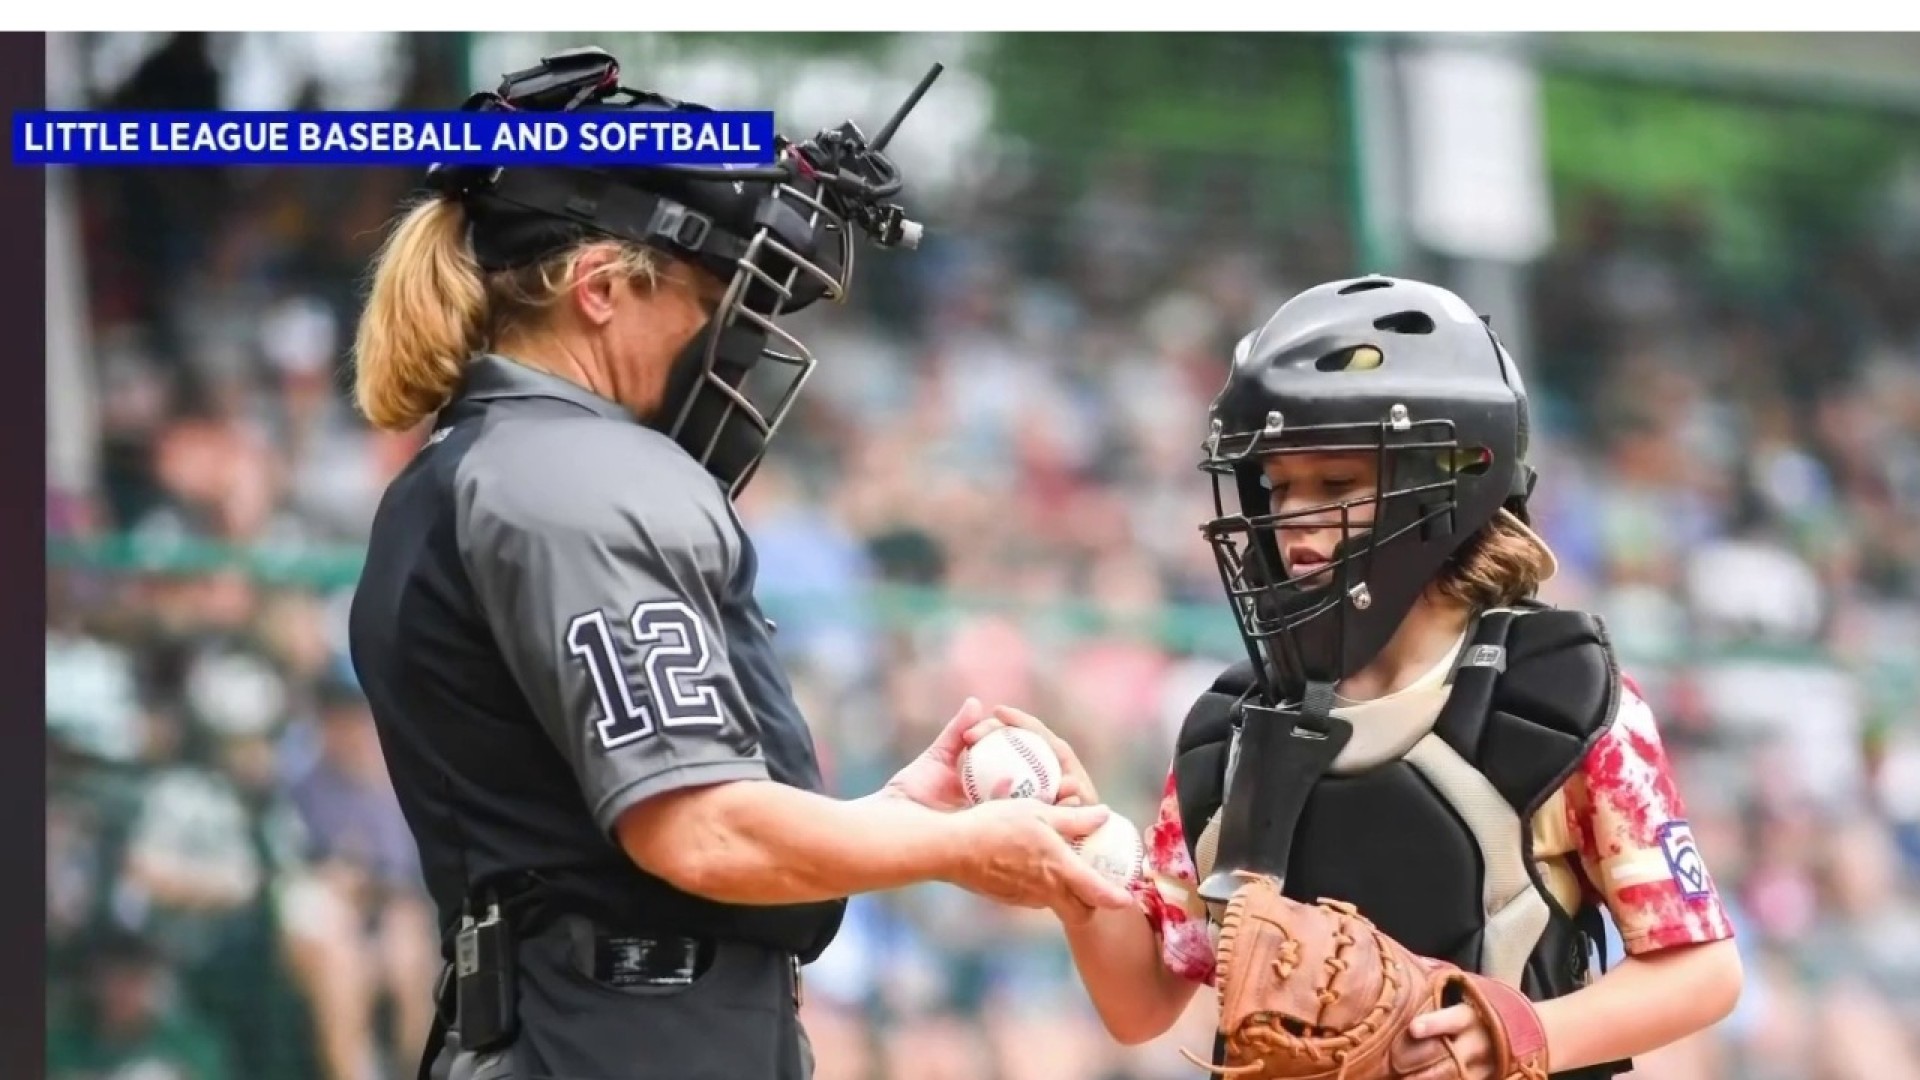 Female umpire from Sugar Land makes history at Little League World Series